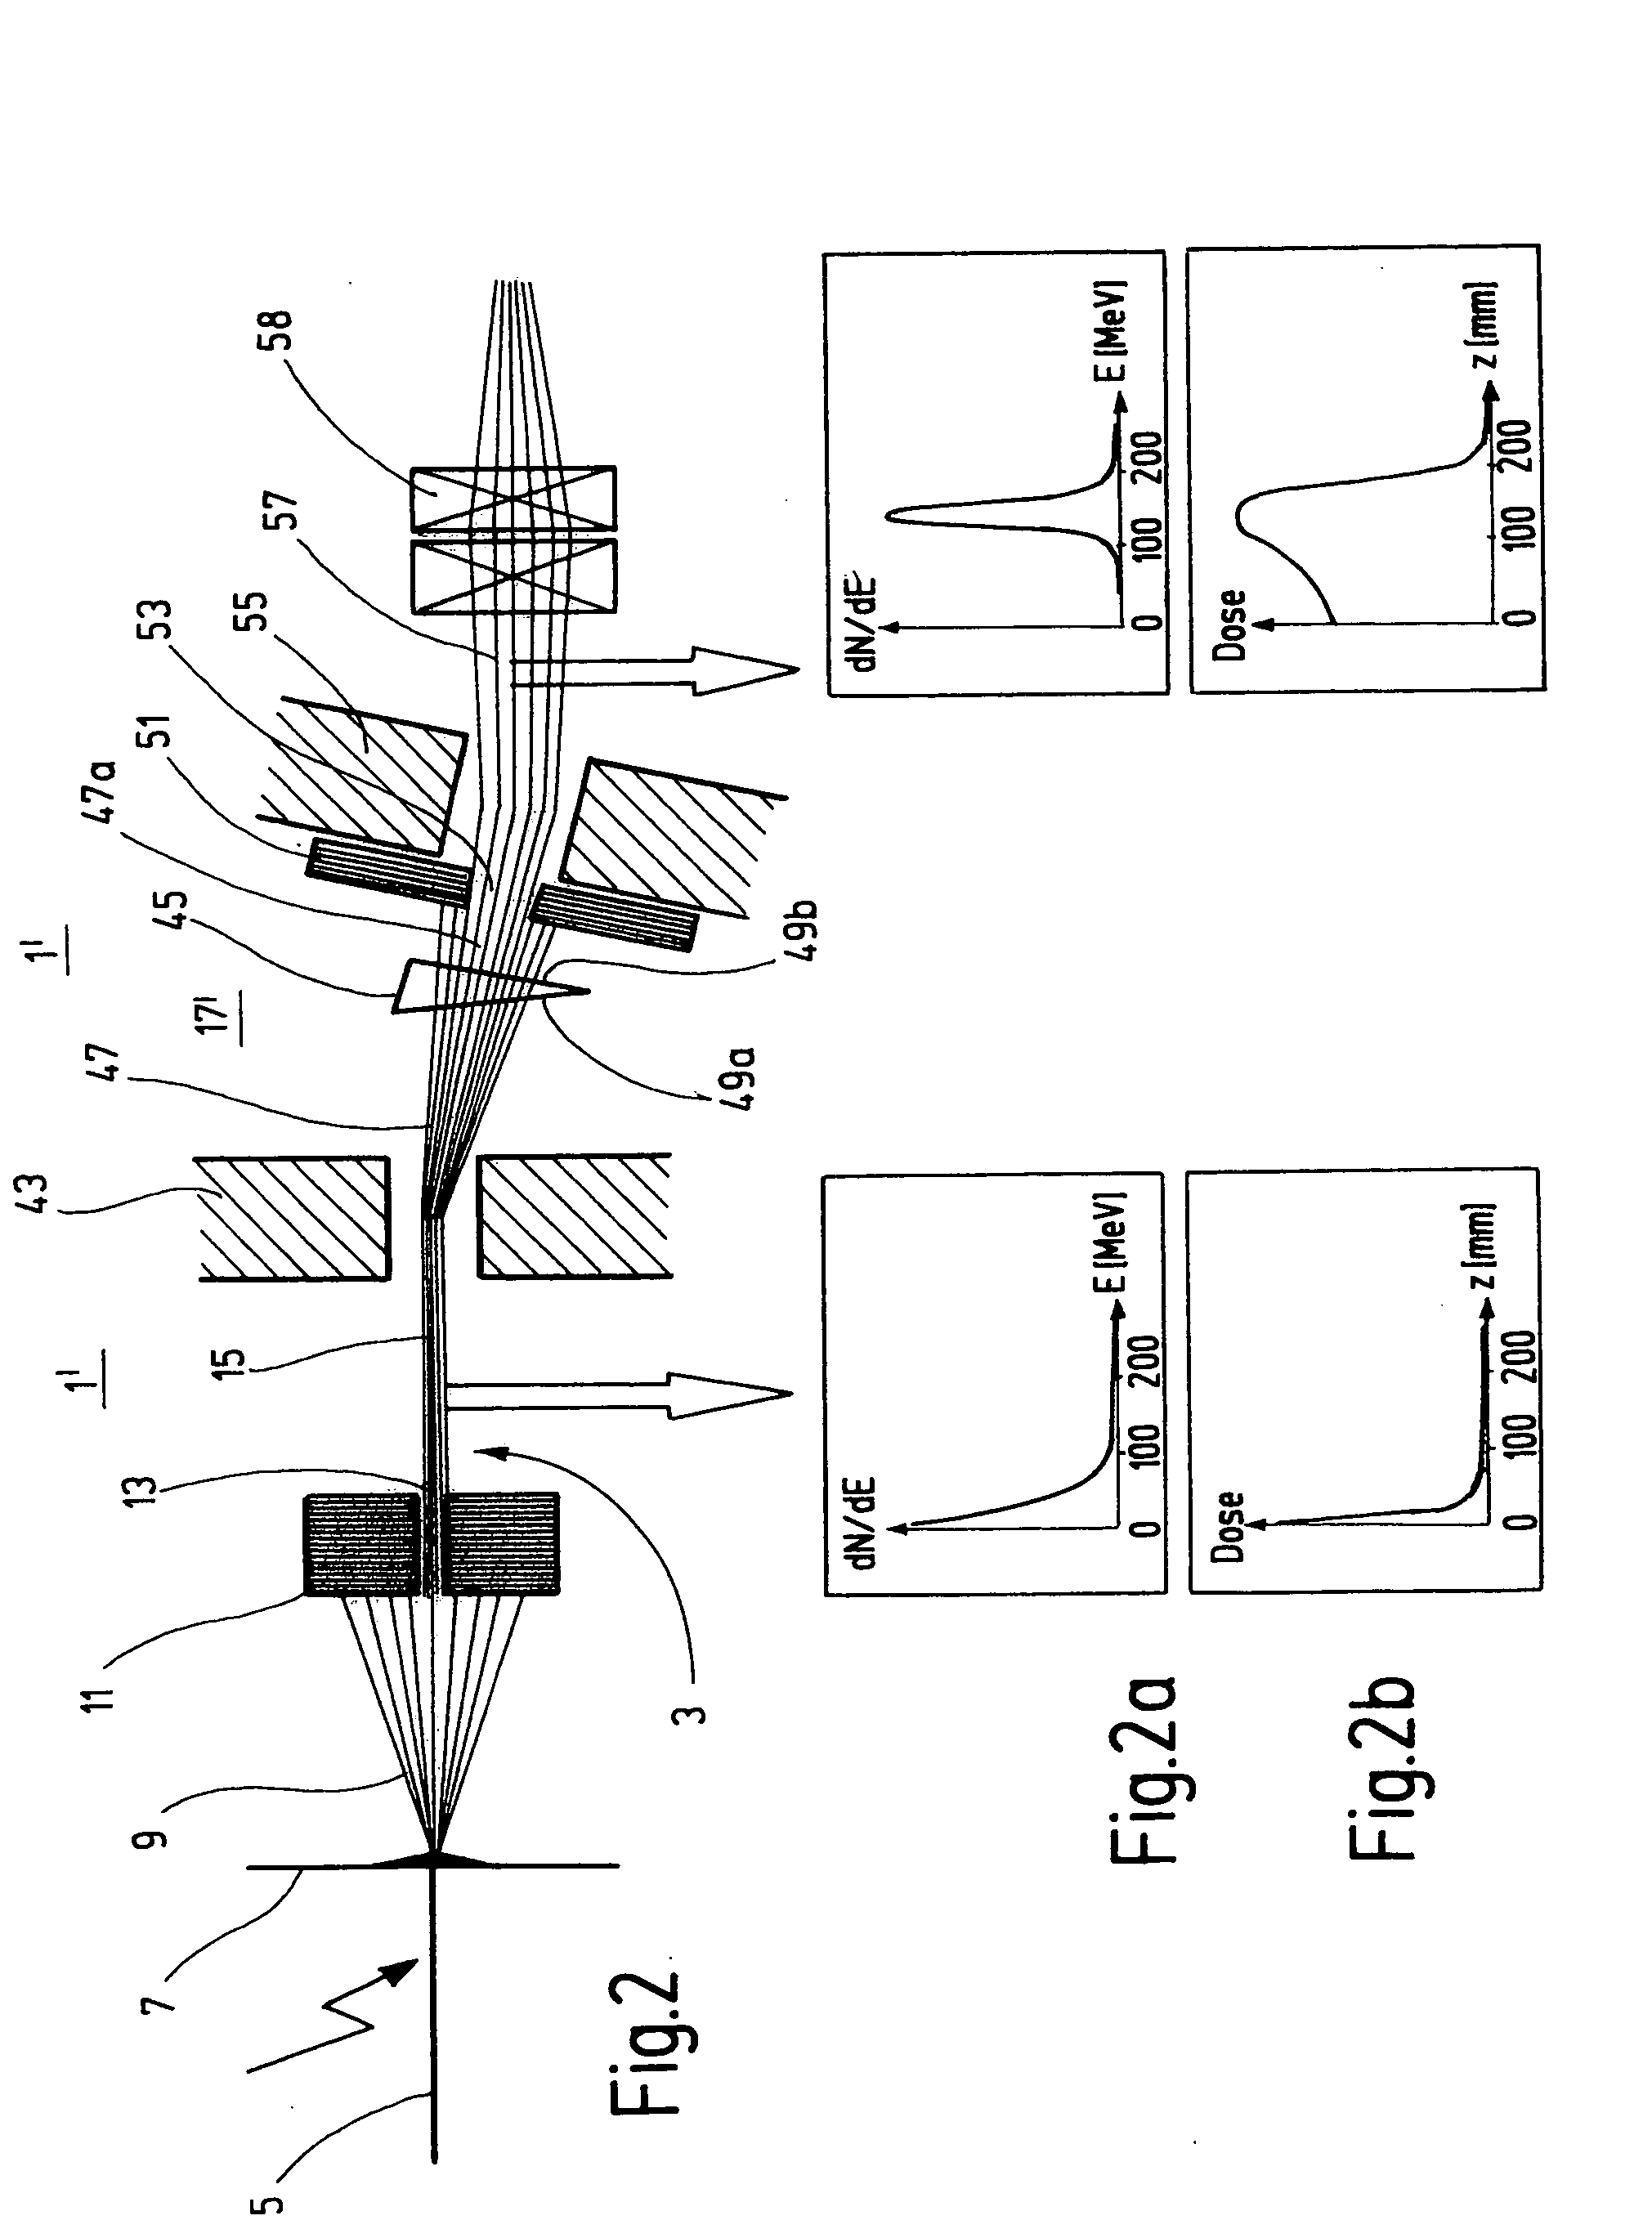 Energy filter device